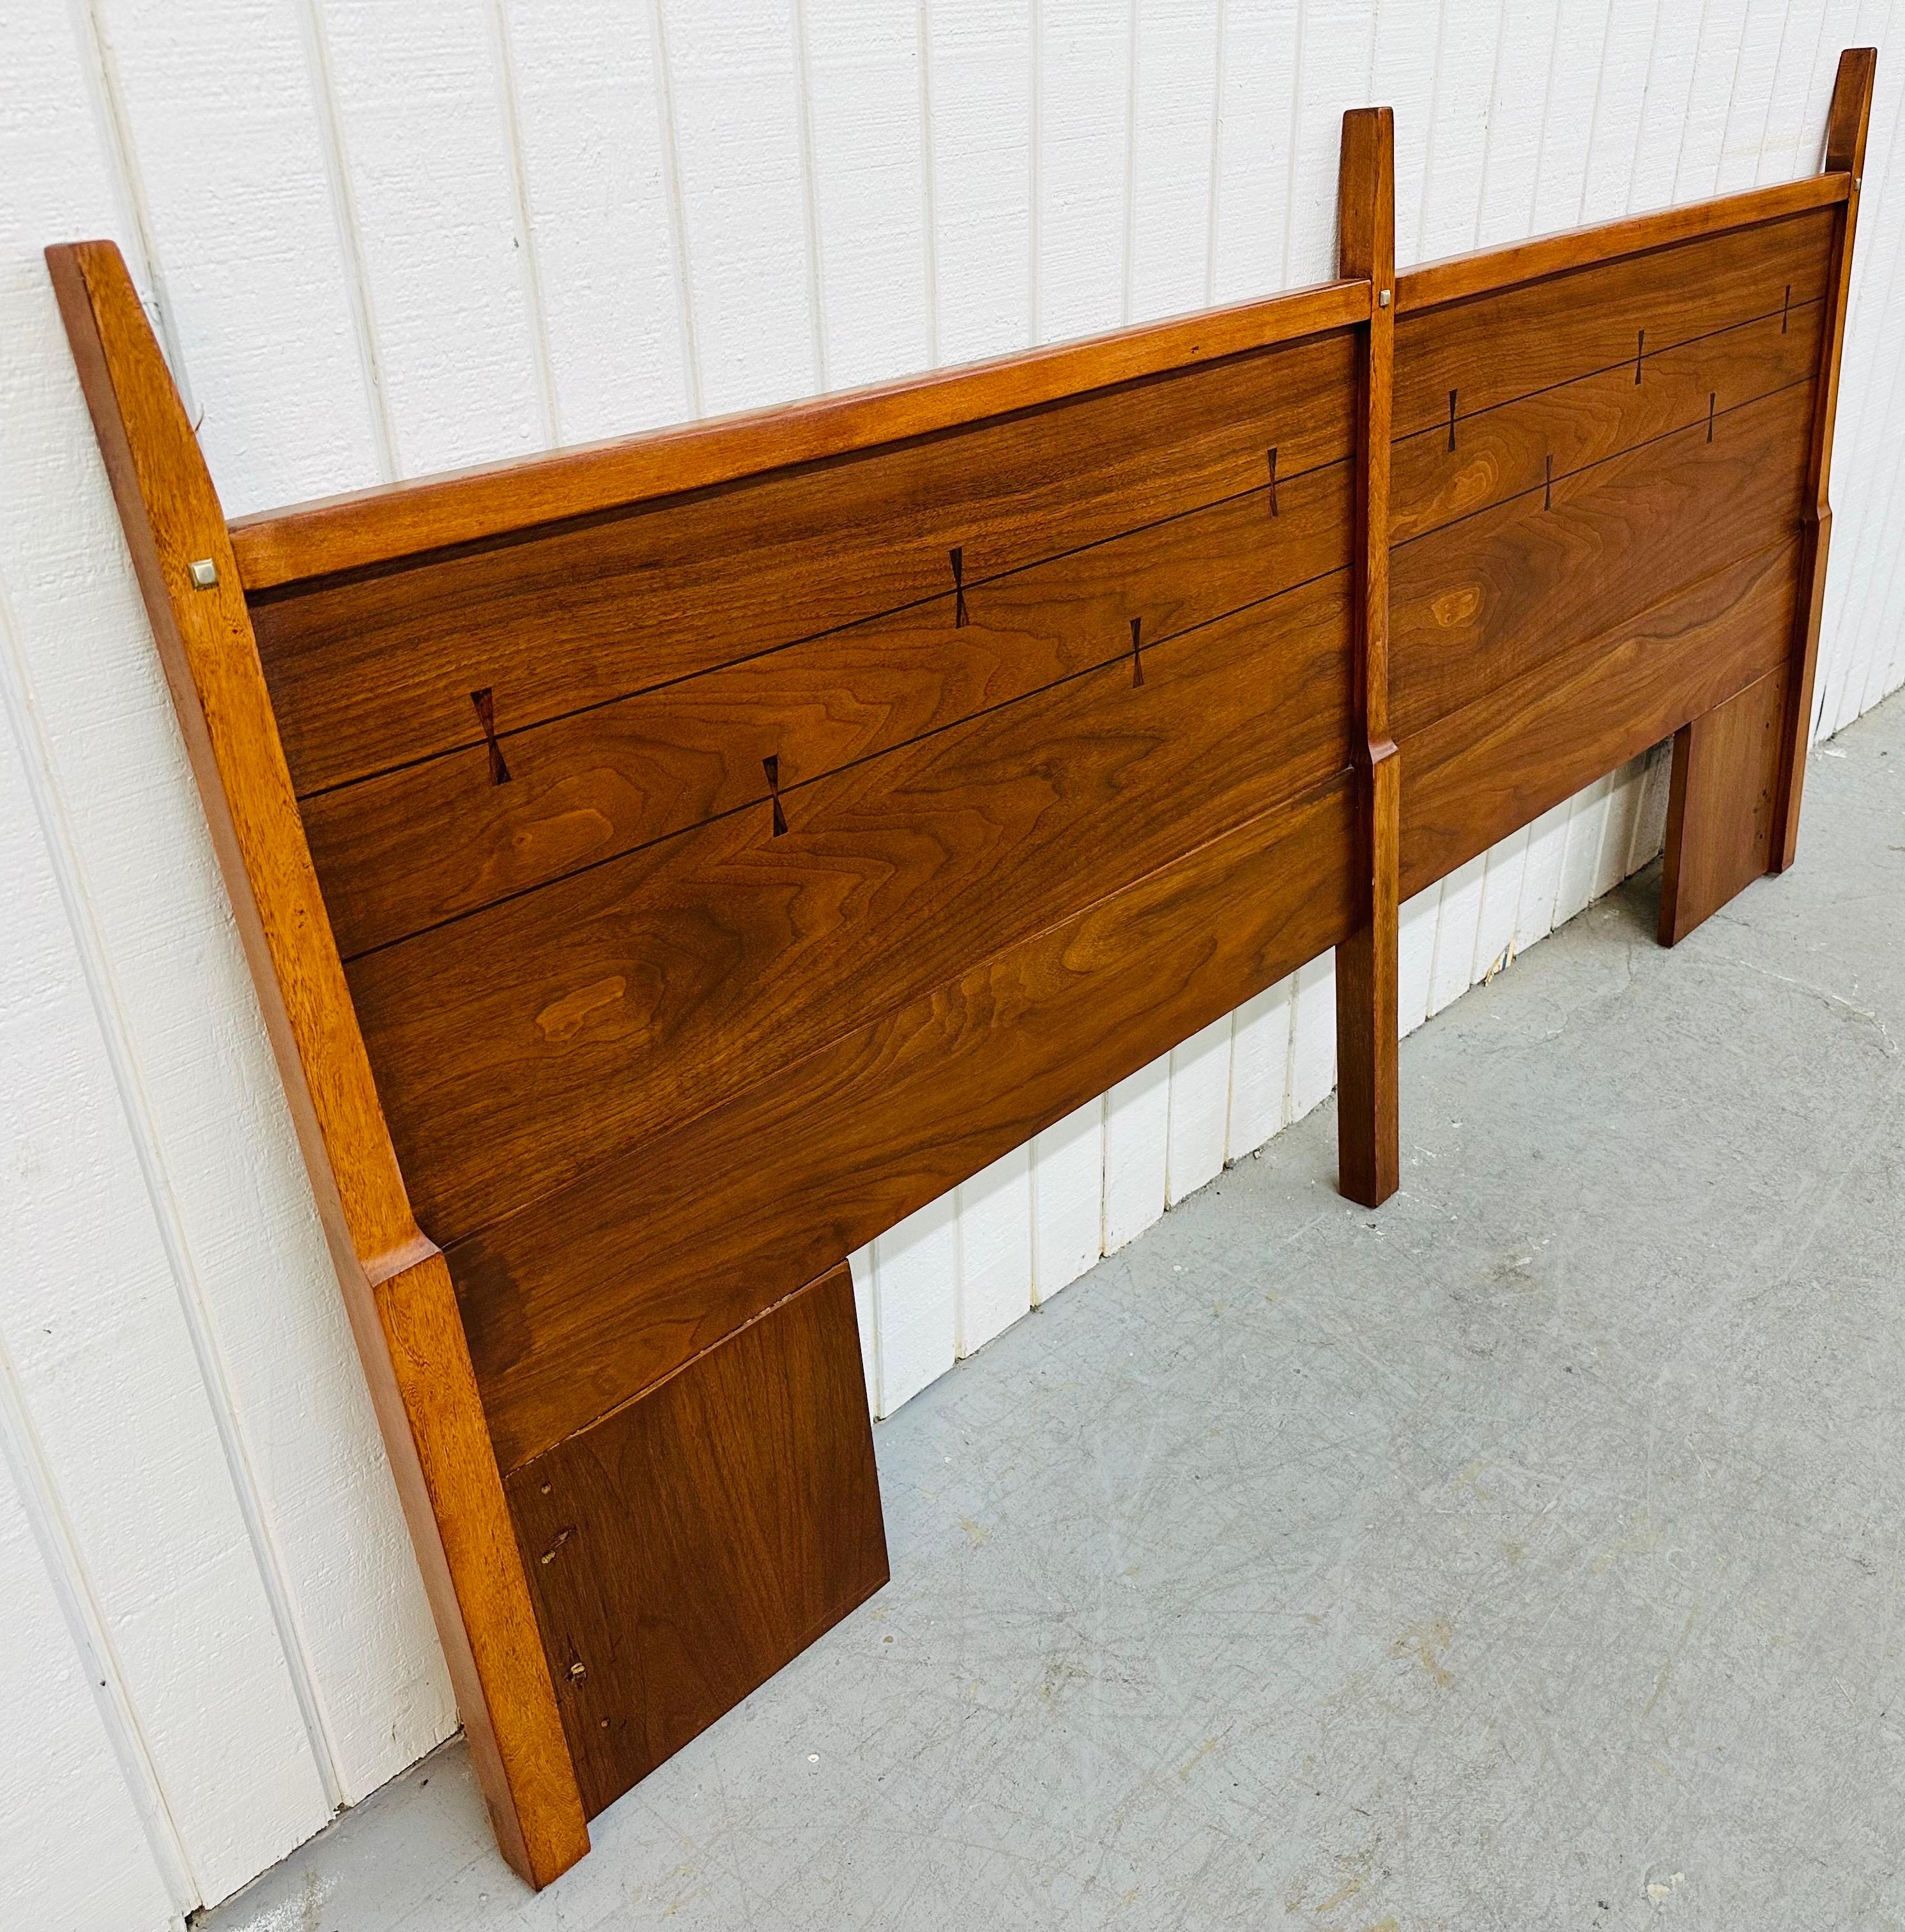 This listing is for a Mid-Century Modern Lane Tuxedo Walnut King Headboard. Featuring a straight line design, iconic Tuxedo inlay, square nailhead accents on each post, and a beautiful walnut finish. This is an exceptional combination of quality and